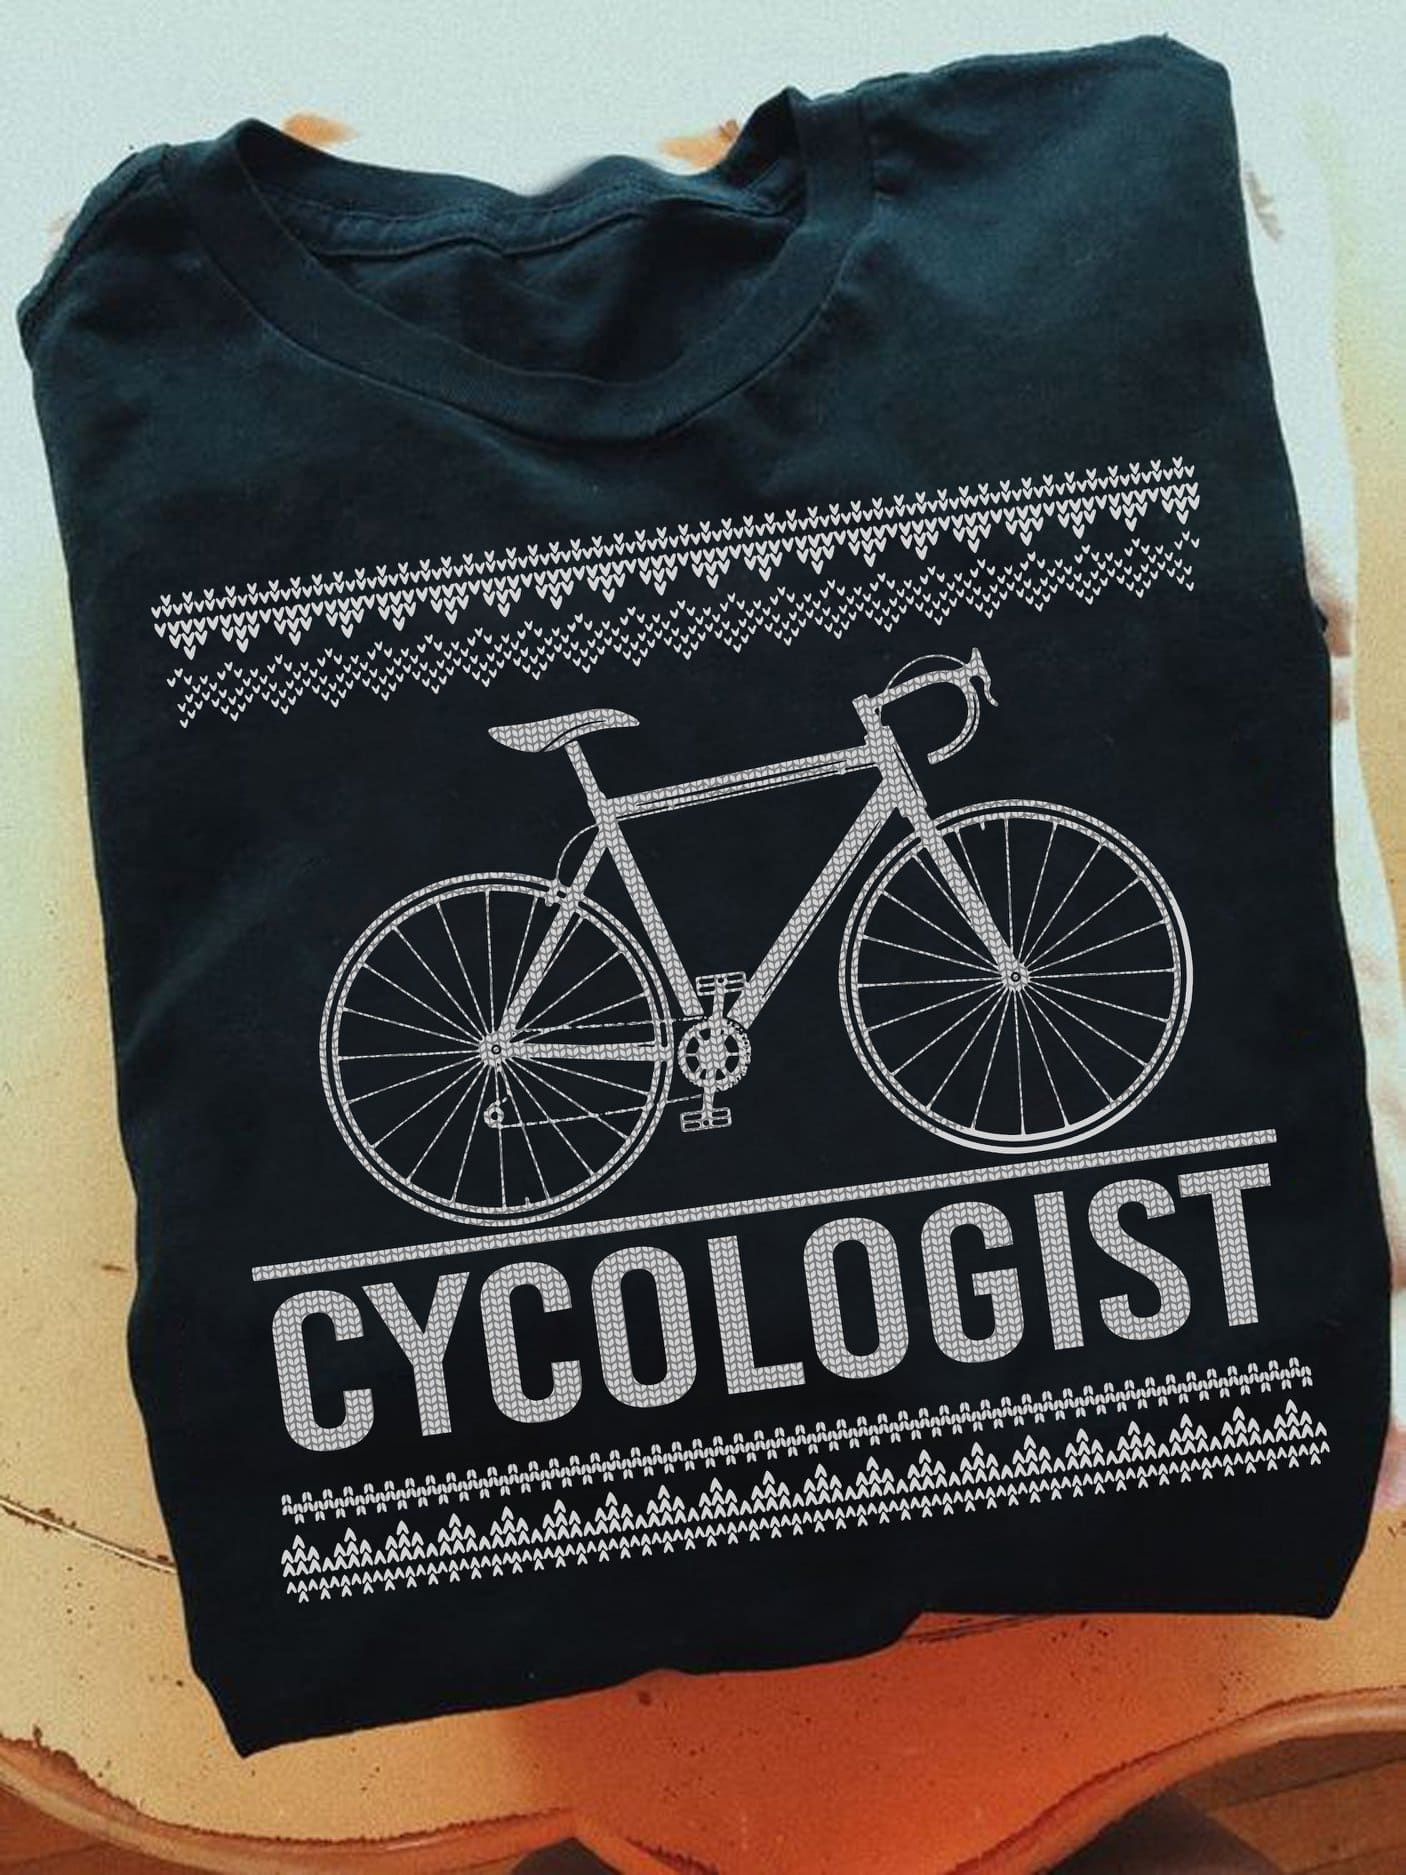 Cycologist T-shirt - Gift for bikers, riding bicycle the hobby